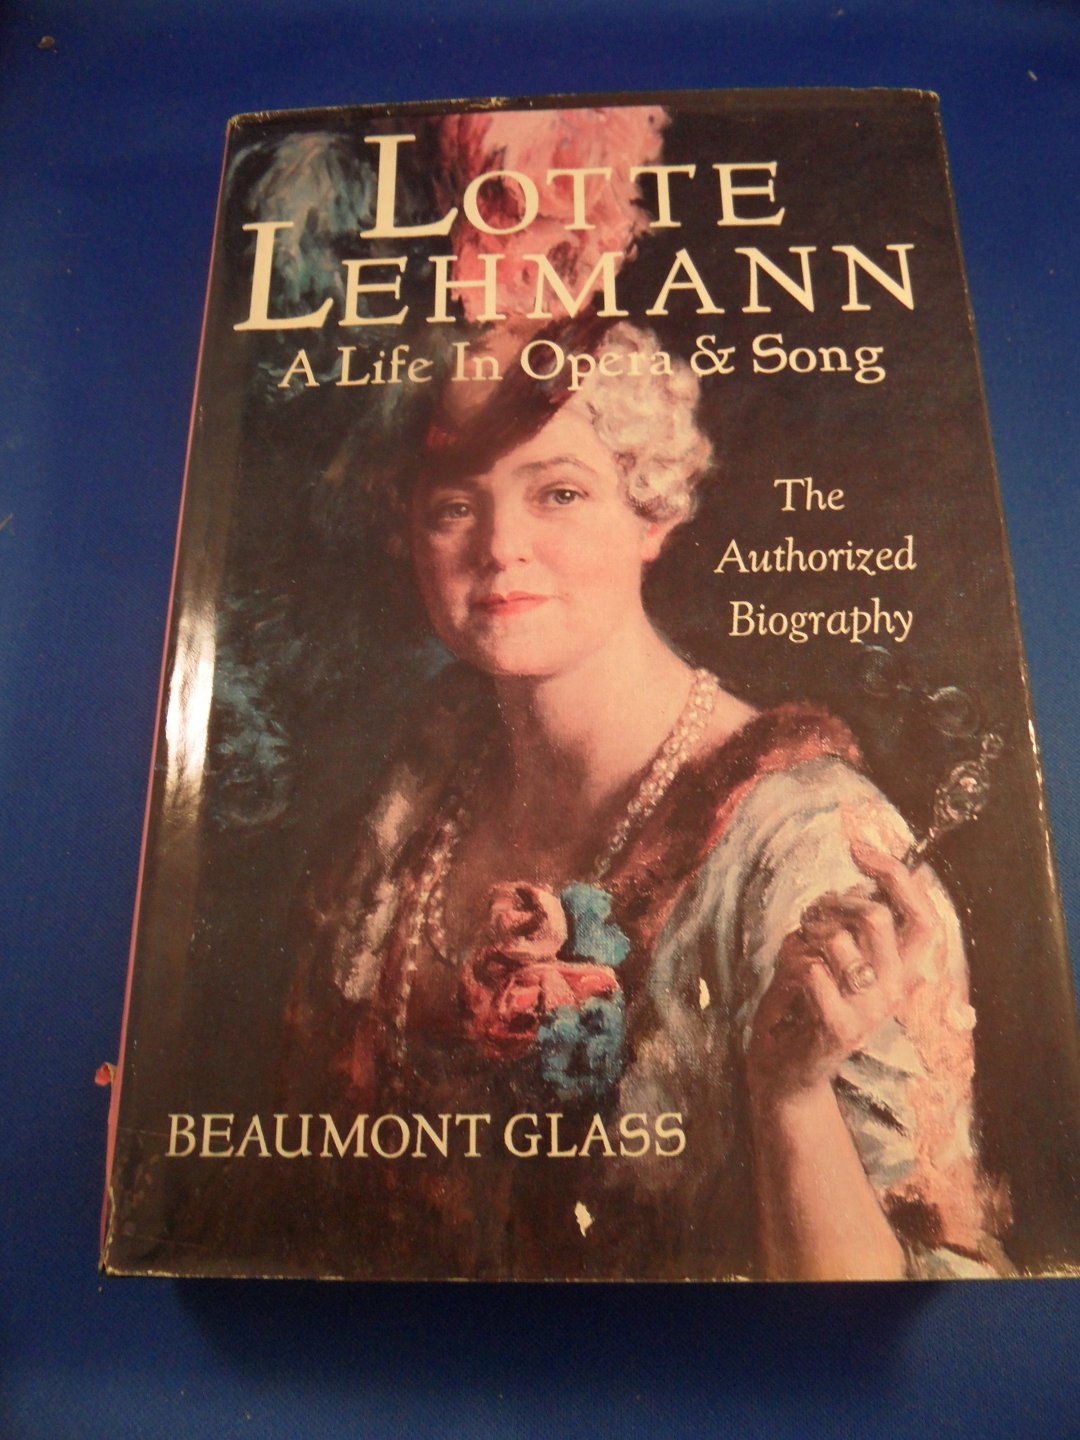 Glass, Beaumont  - Lotte Lehmann. a life in opera & song. The authorized biography